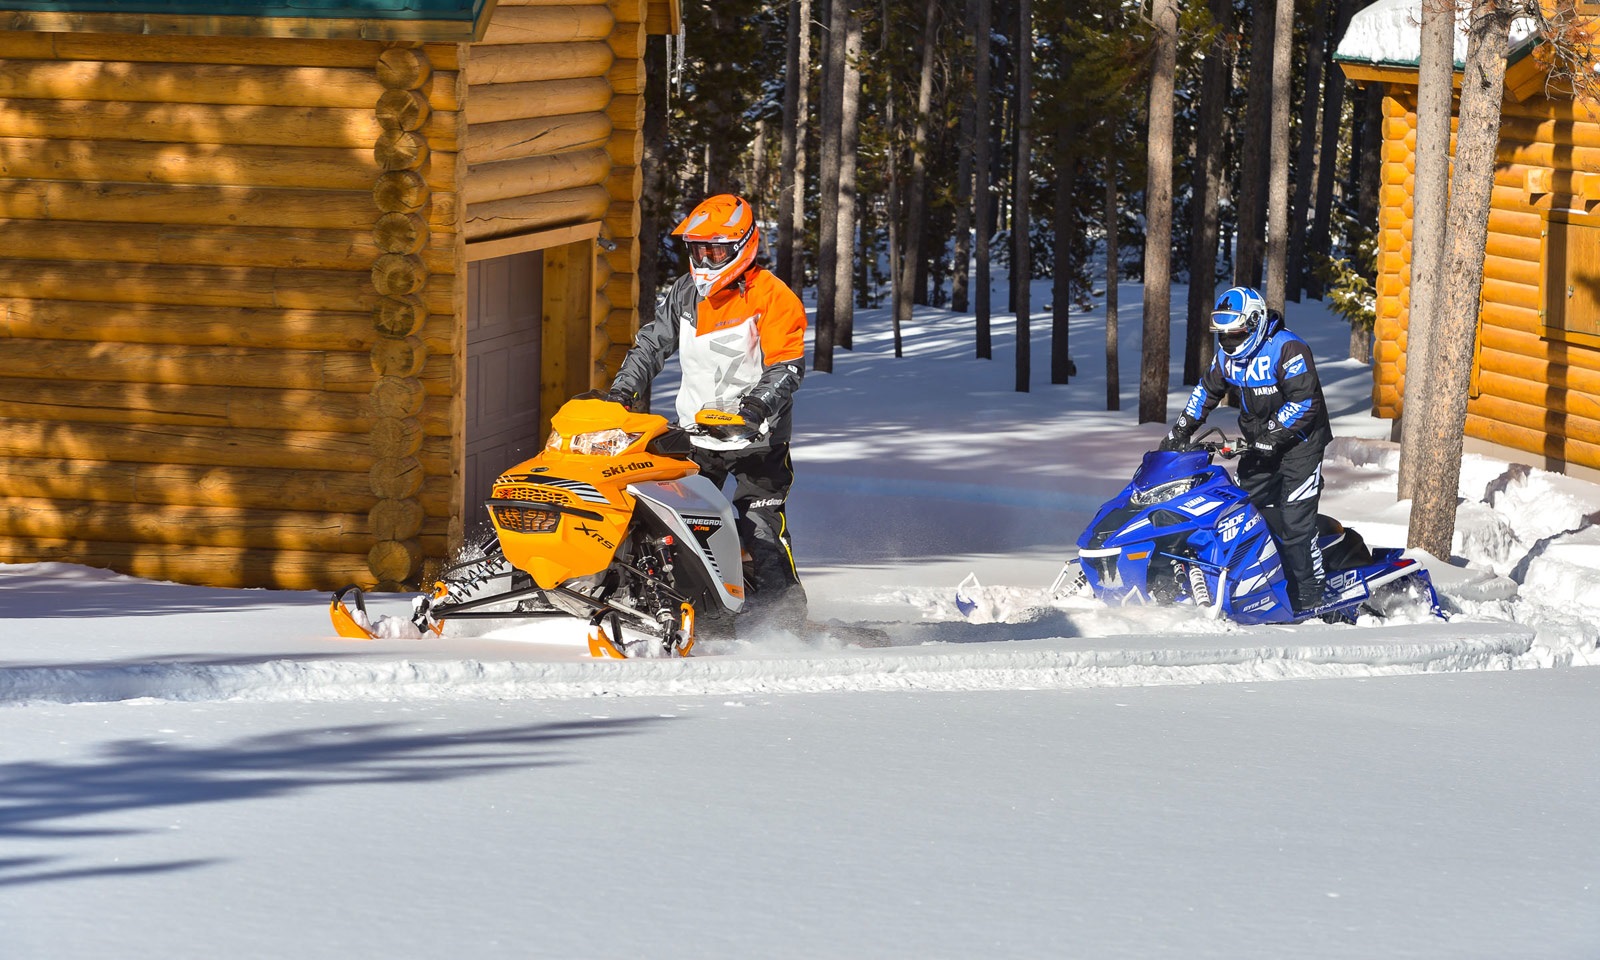 Snowmobile Safety: How Fast Should You Drive?